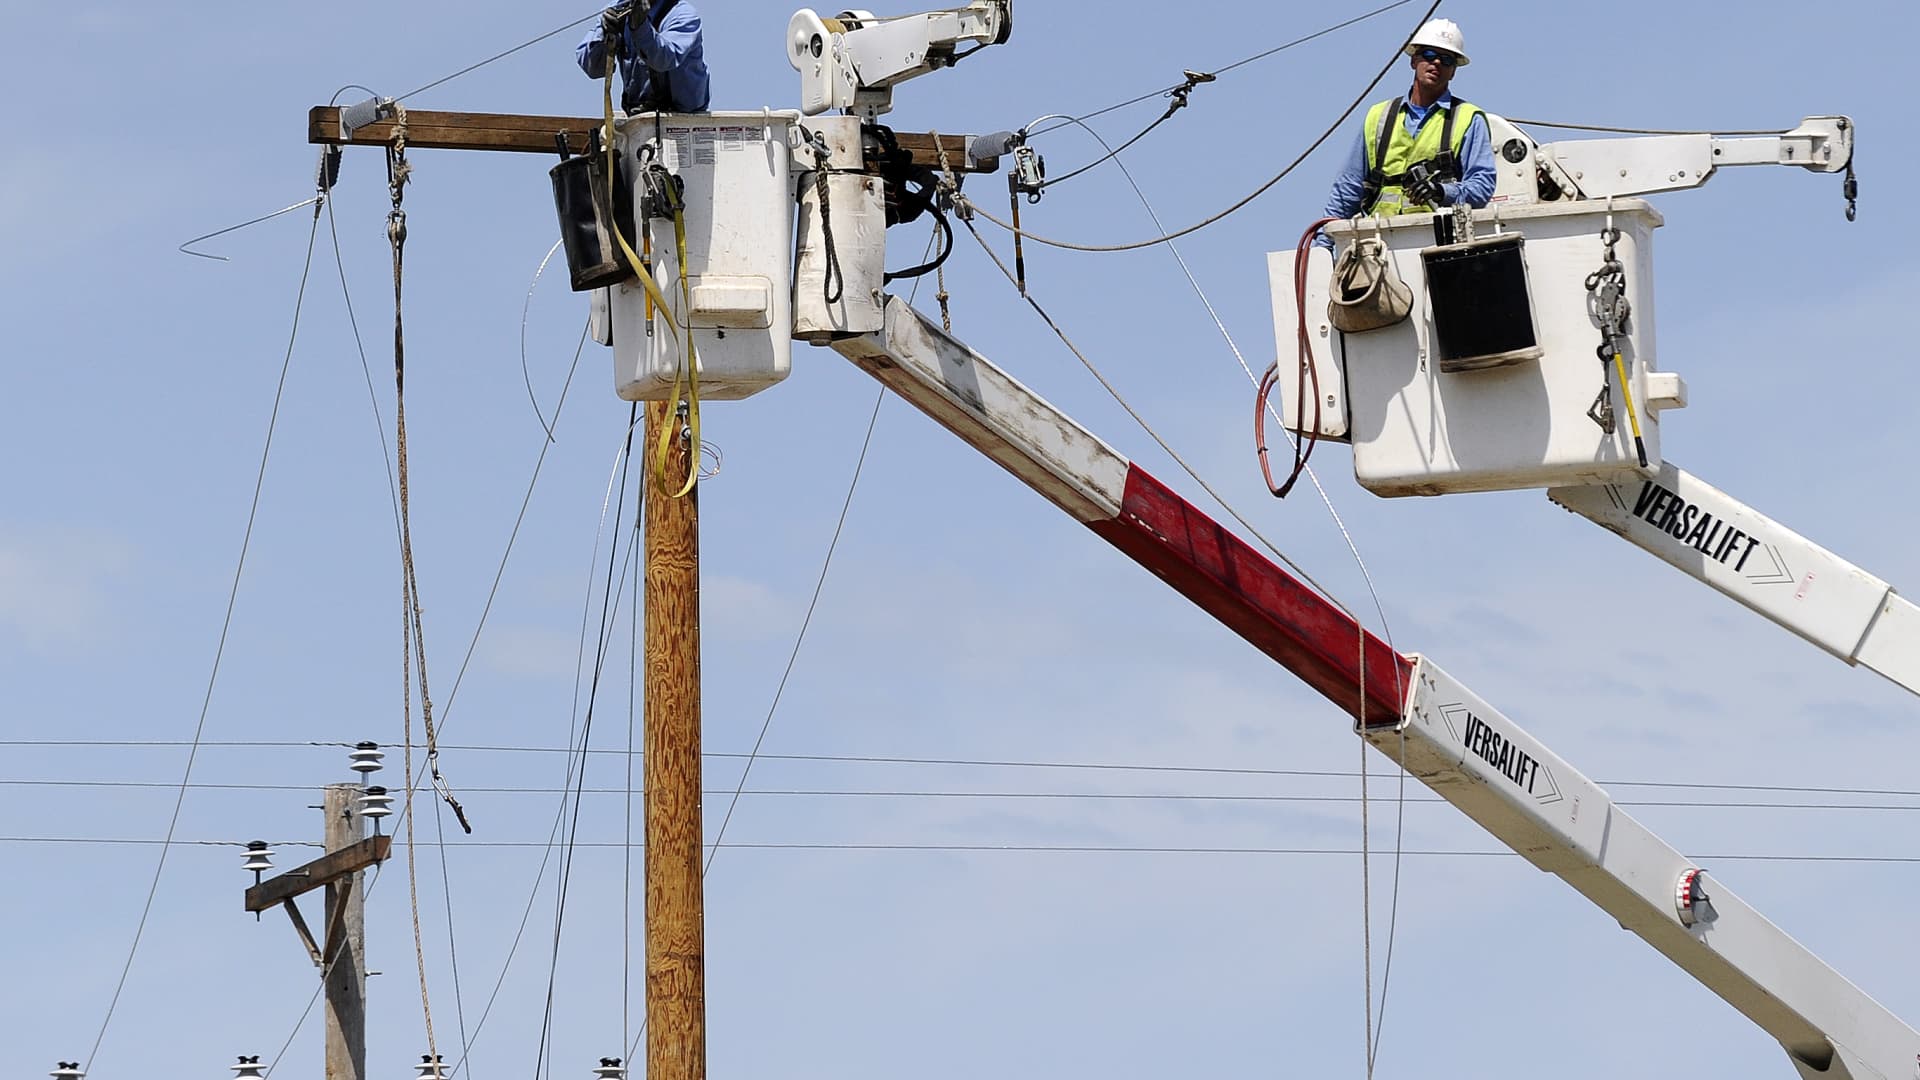 Electric company employees work to restore power in a tornado devastated neighborhood on May 22, 2013 in Moore, Oklahoma.